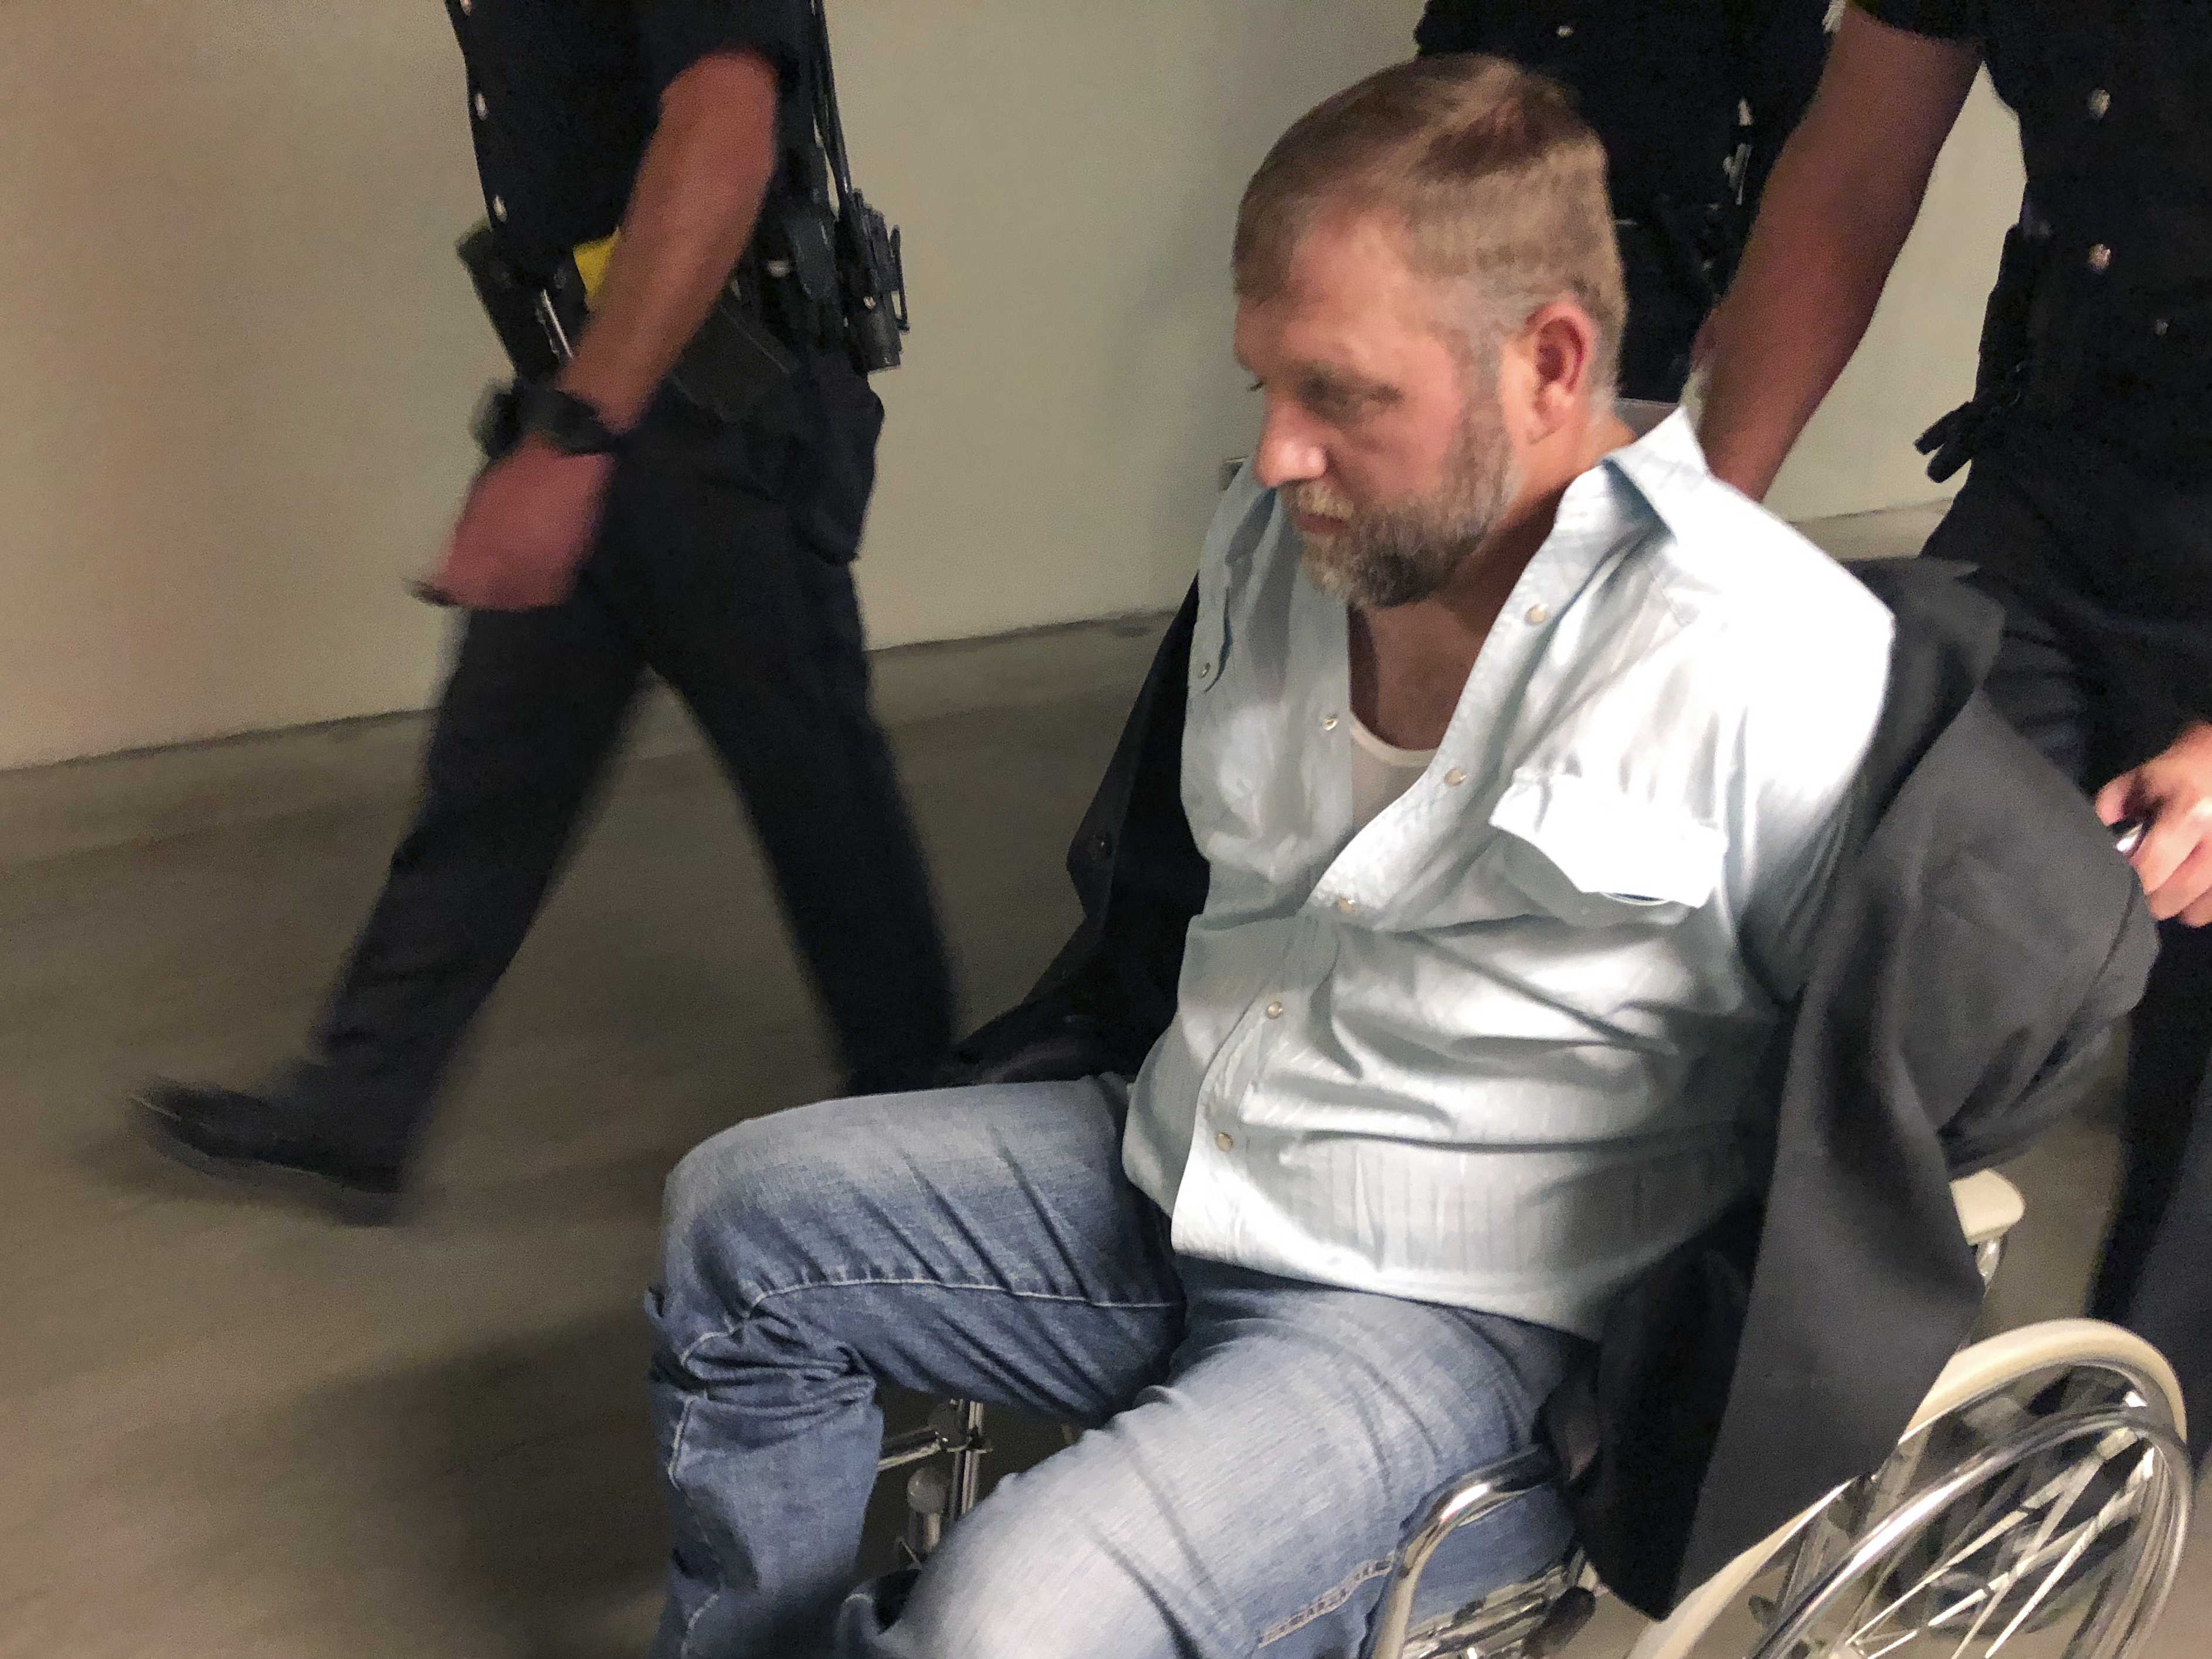 Anti-government activist Ammon Bundy is wheeled from the Idaho Statehouse in Boise, on Aug. 26, 2020. It was his second arrest for trespassing in two days. CREDIT: Keith Ridler/AP